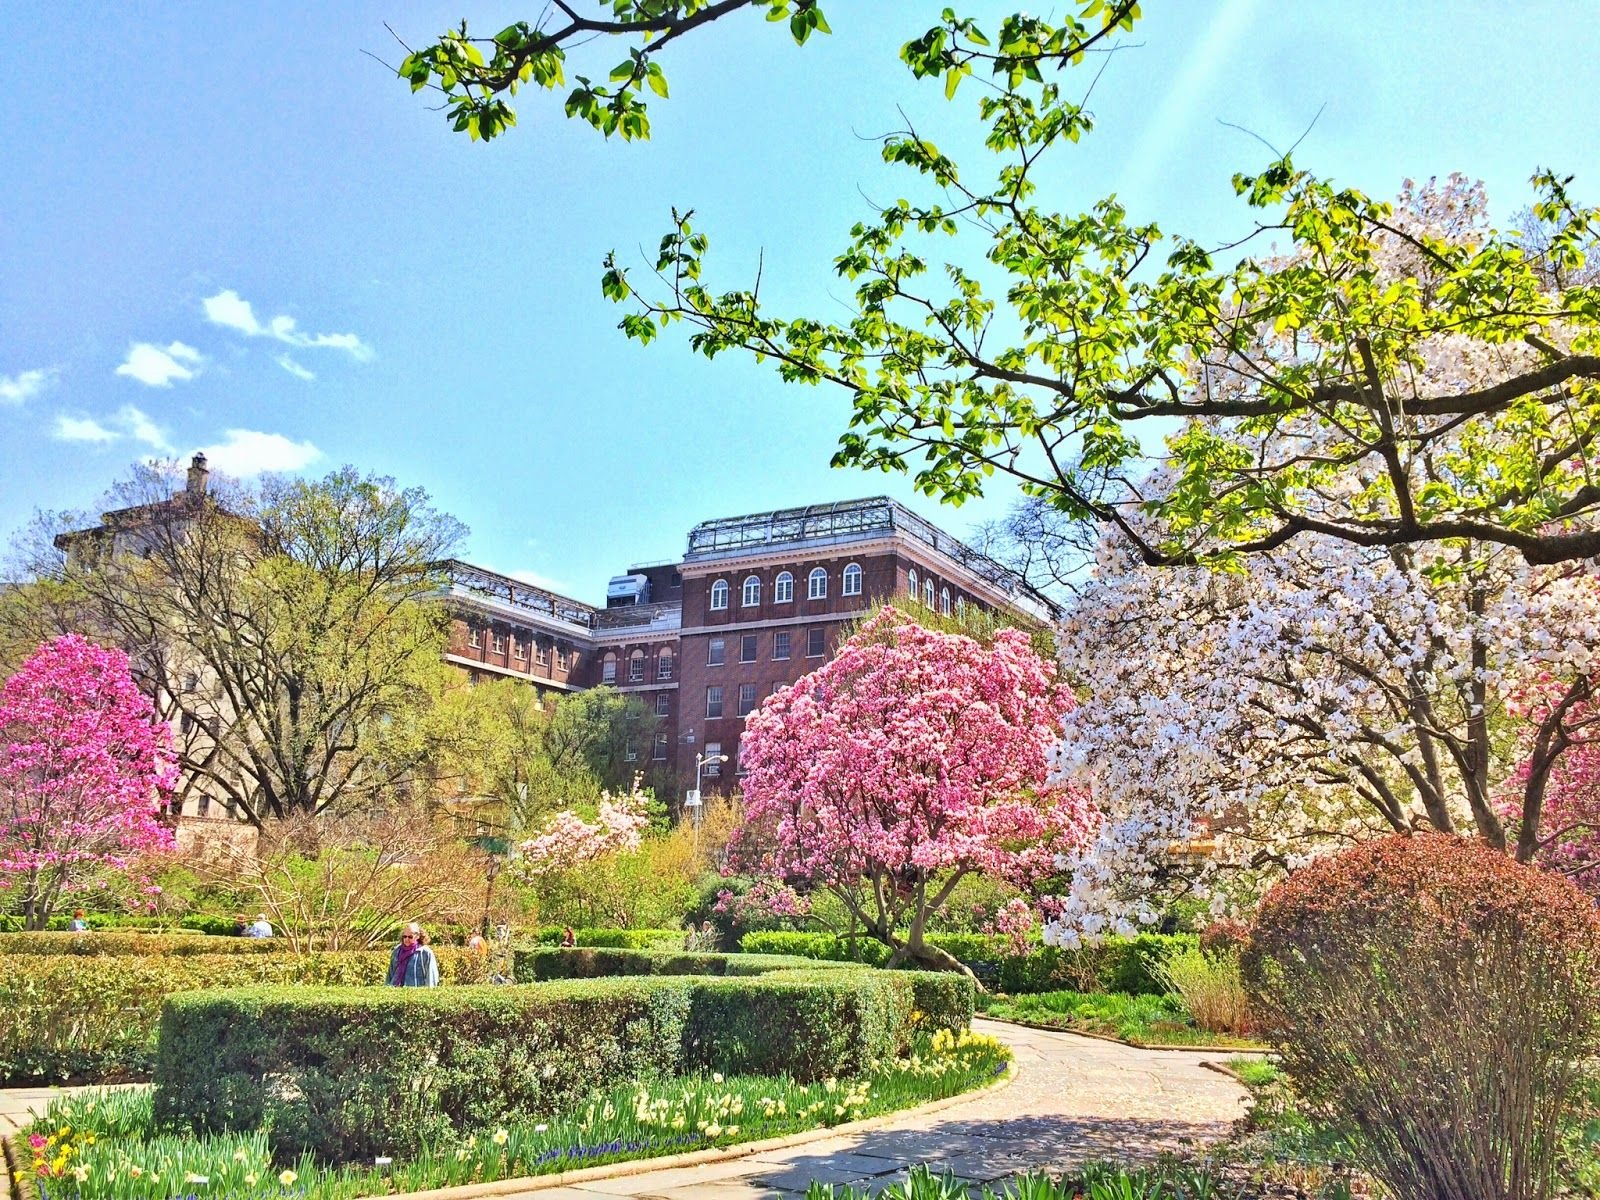 Explore the Conservatory Garden in Central Park. Tour the Central